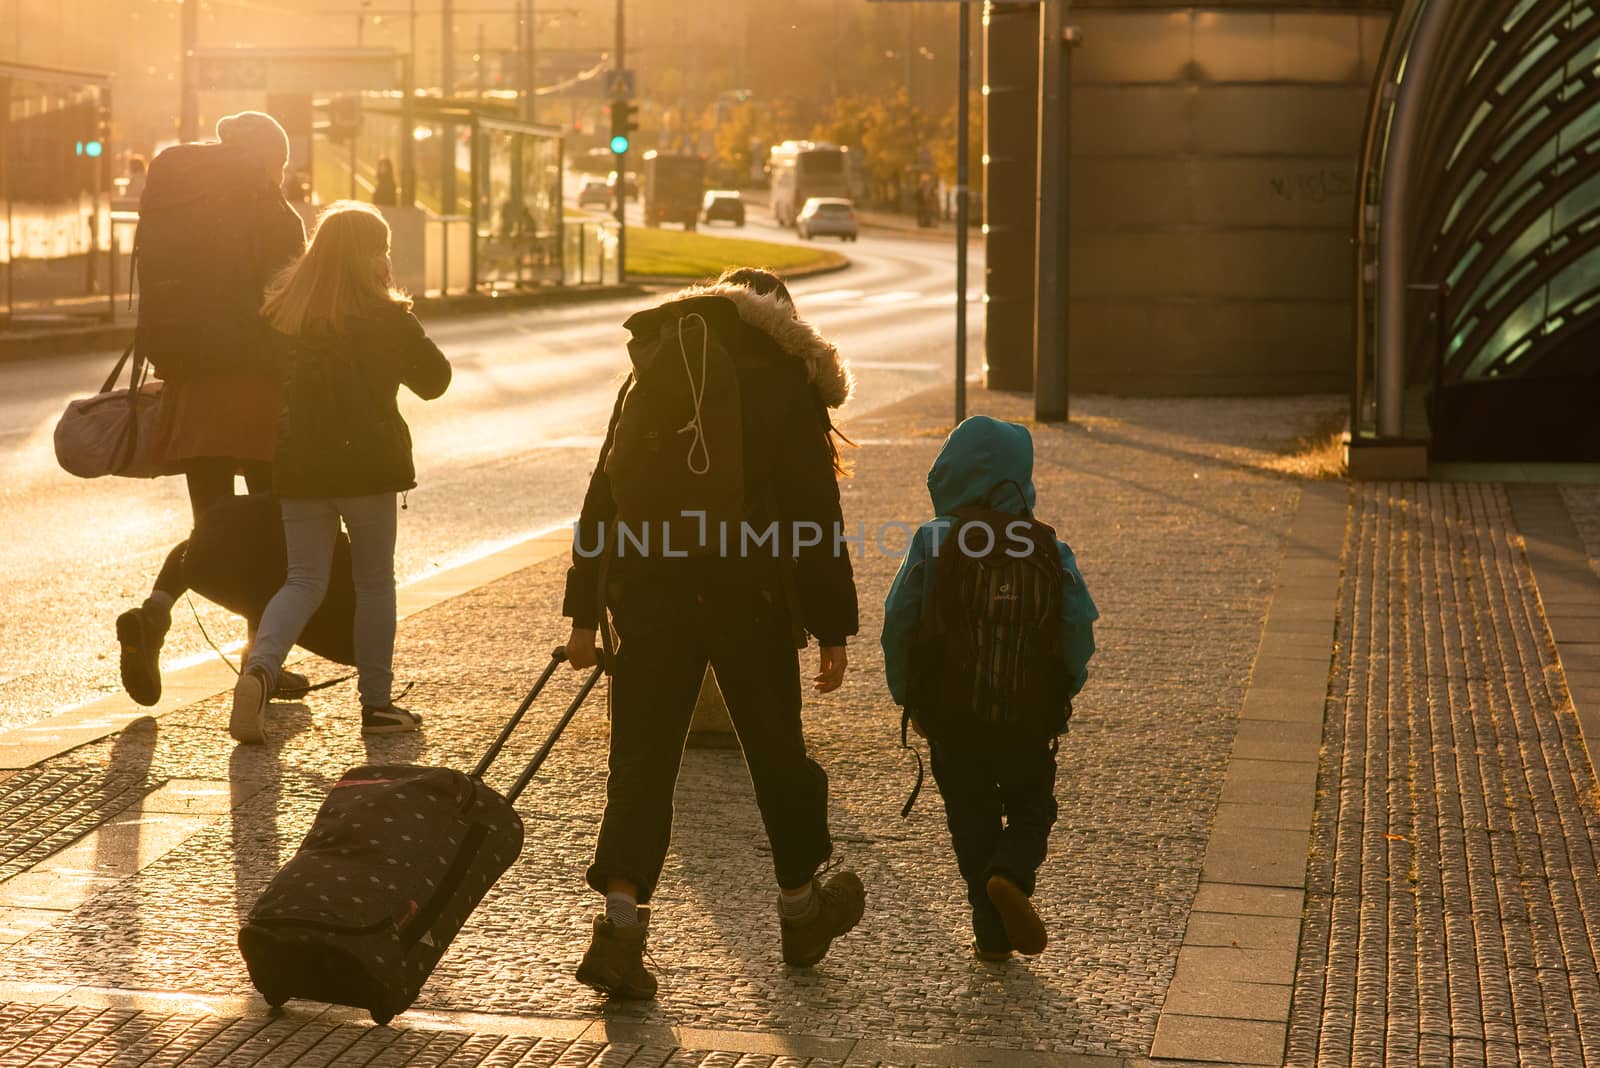 03/04/2018. Brno, Czech Republic. Family with mask is crossing the street at Hradcanska metro station during quarantine period due to outbreak of COVID-19 as winter is starting. Prague, Czech Republic by gonzalobell